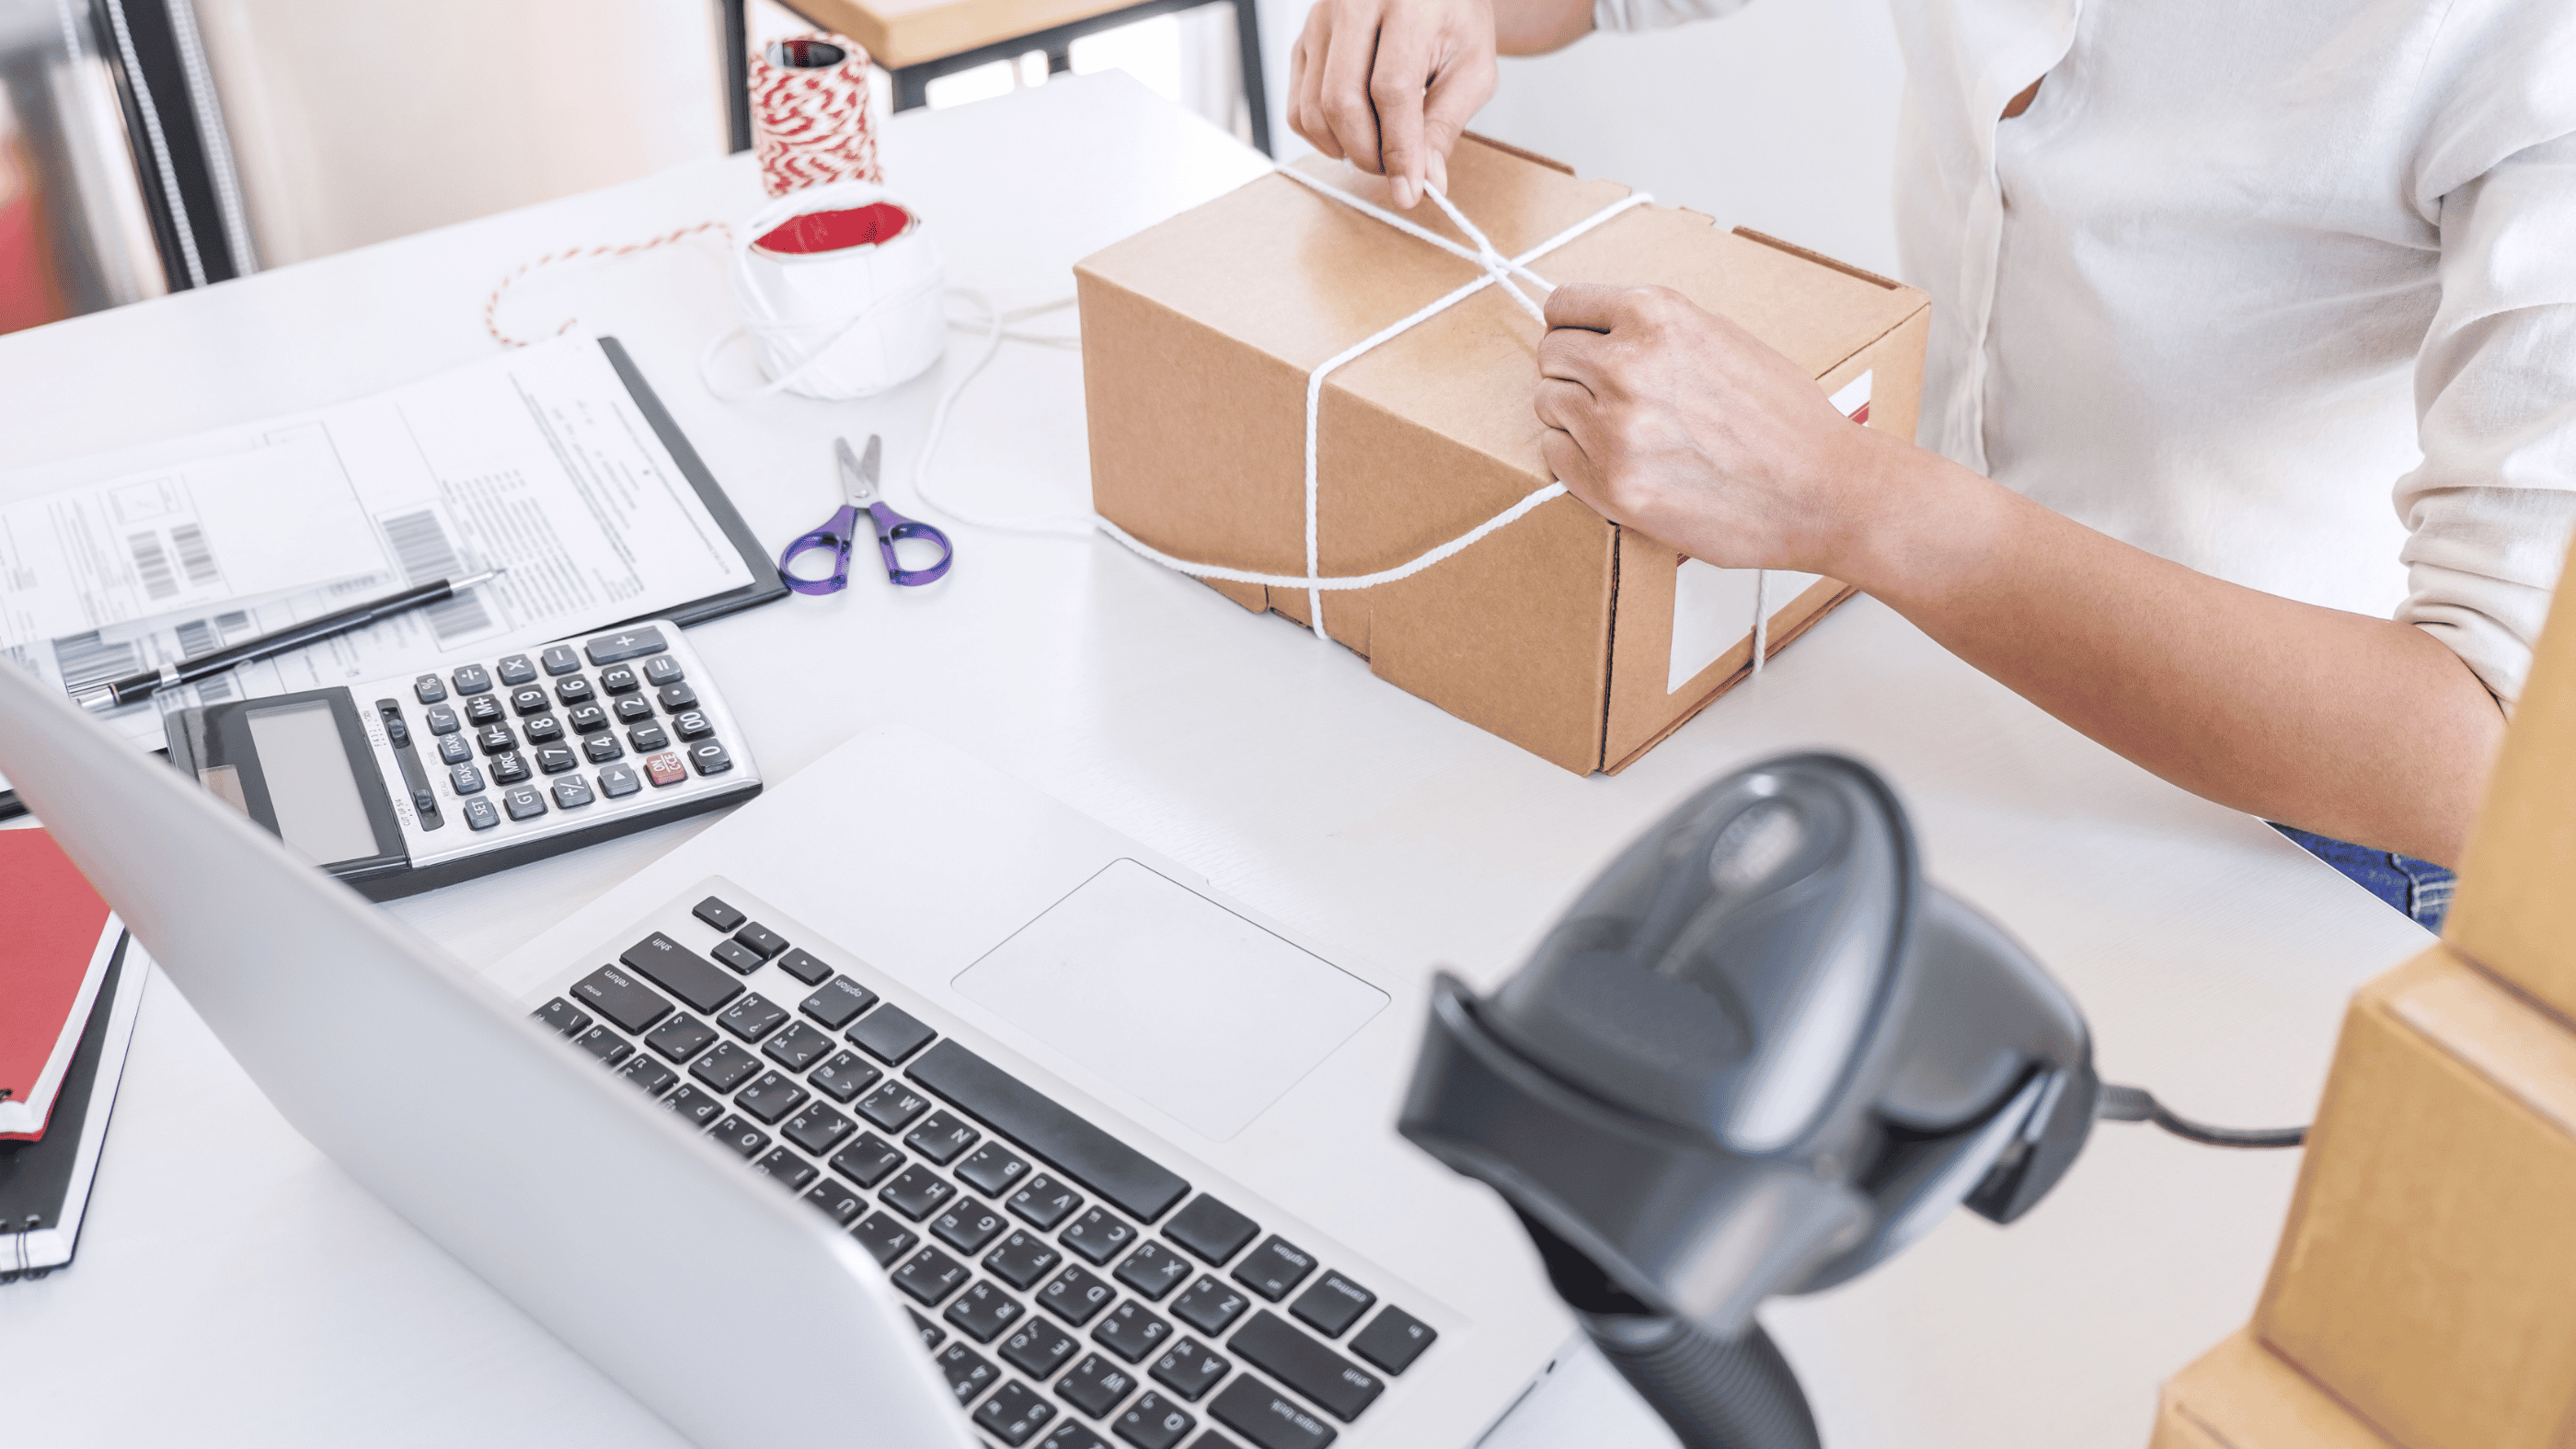 Business person tying up a package on his desk